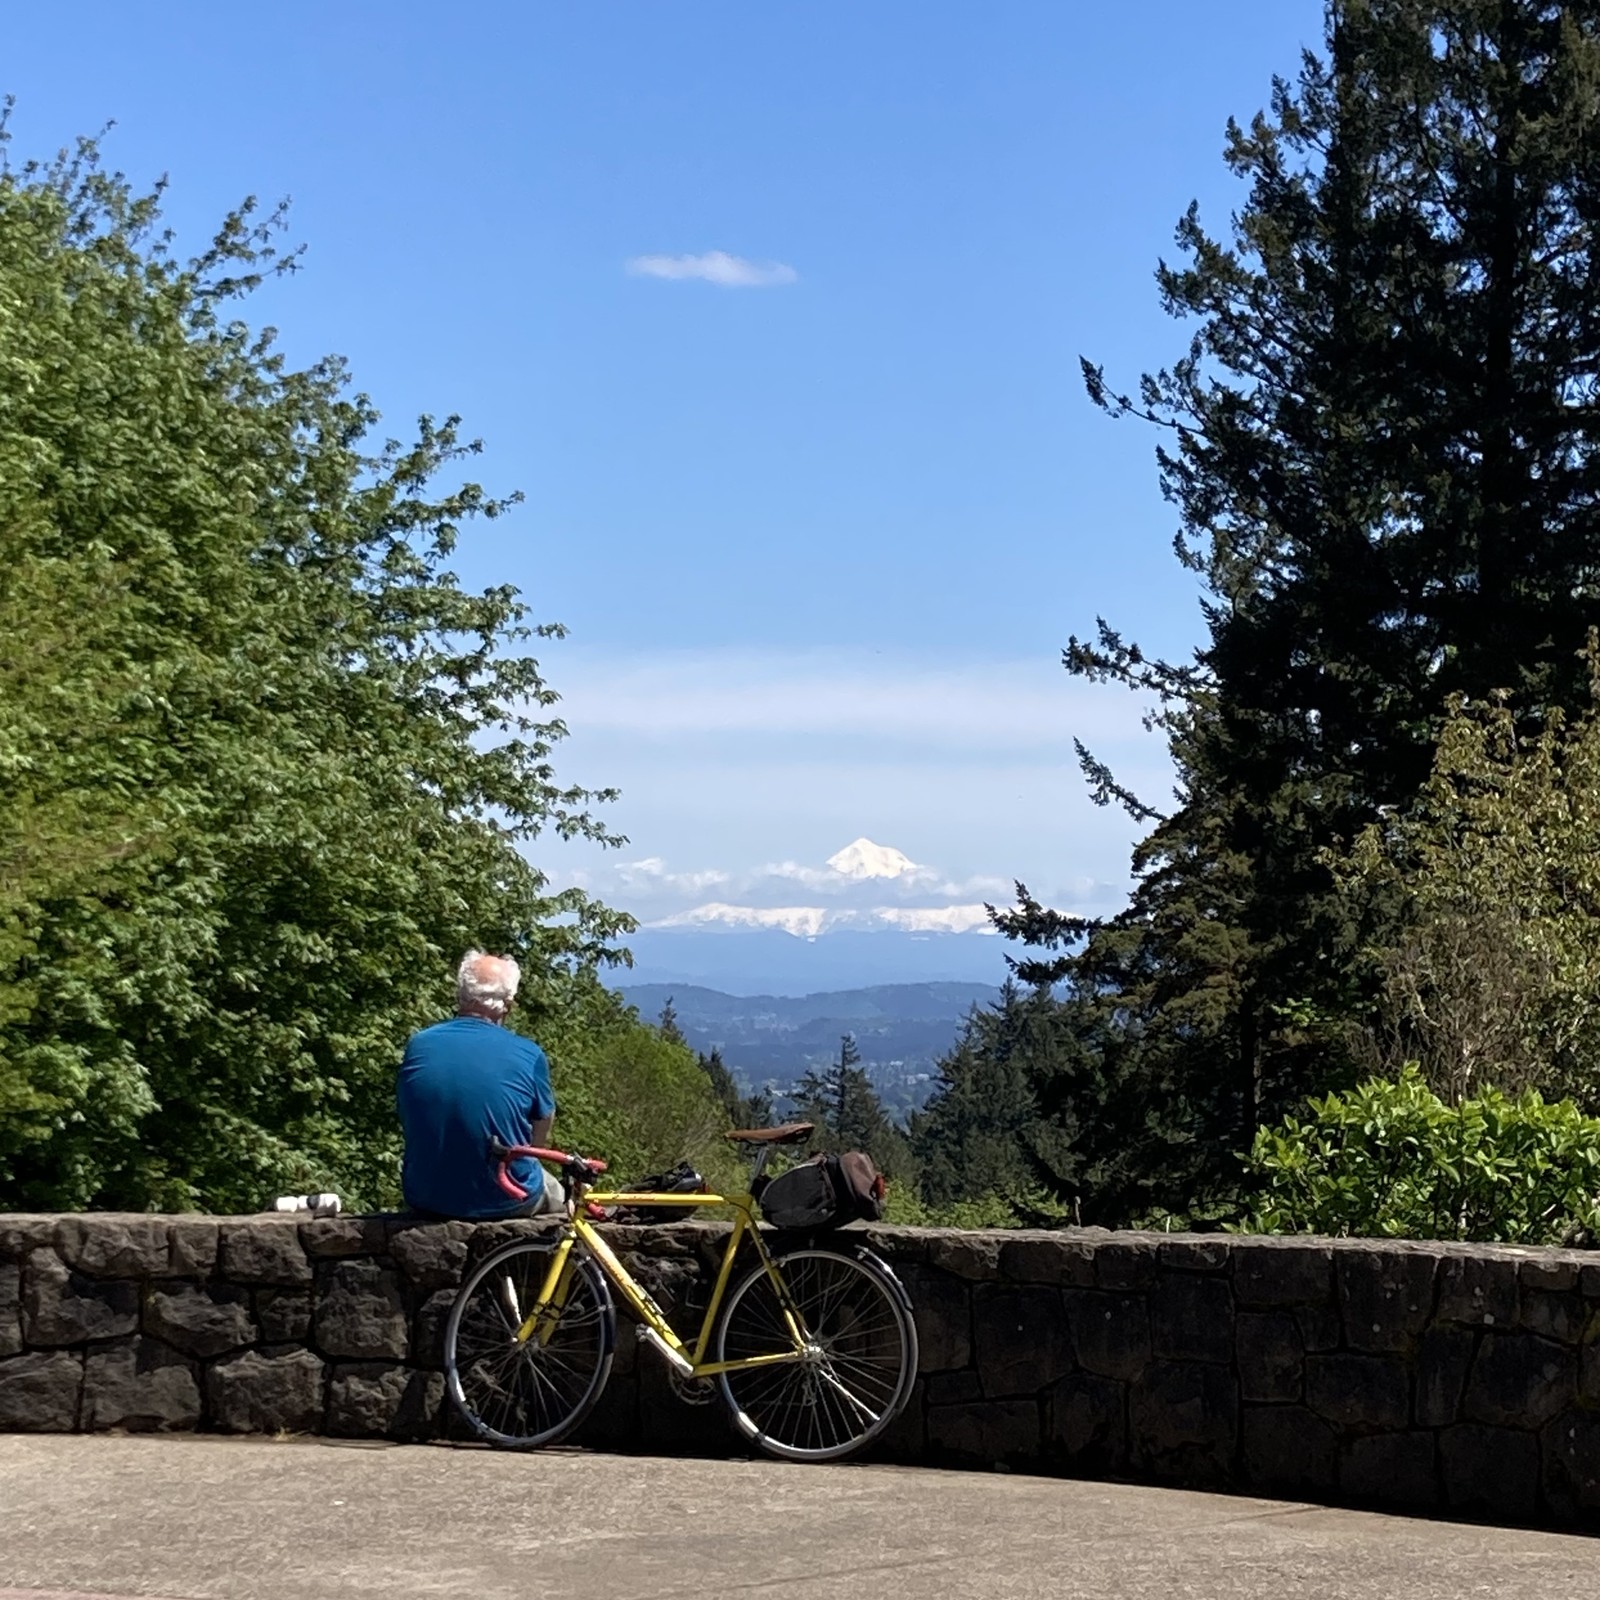 A middle aged man in a t shirt sits with his back to the camera next to a vintage bicycle. He is looking toward mt Hood, whose brilliant white peak is ringed with one low cloud. The sky is otherwise deep and clear